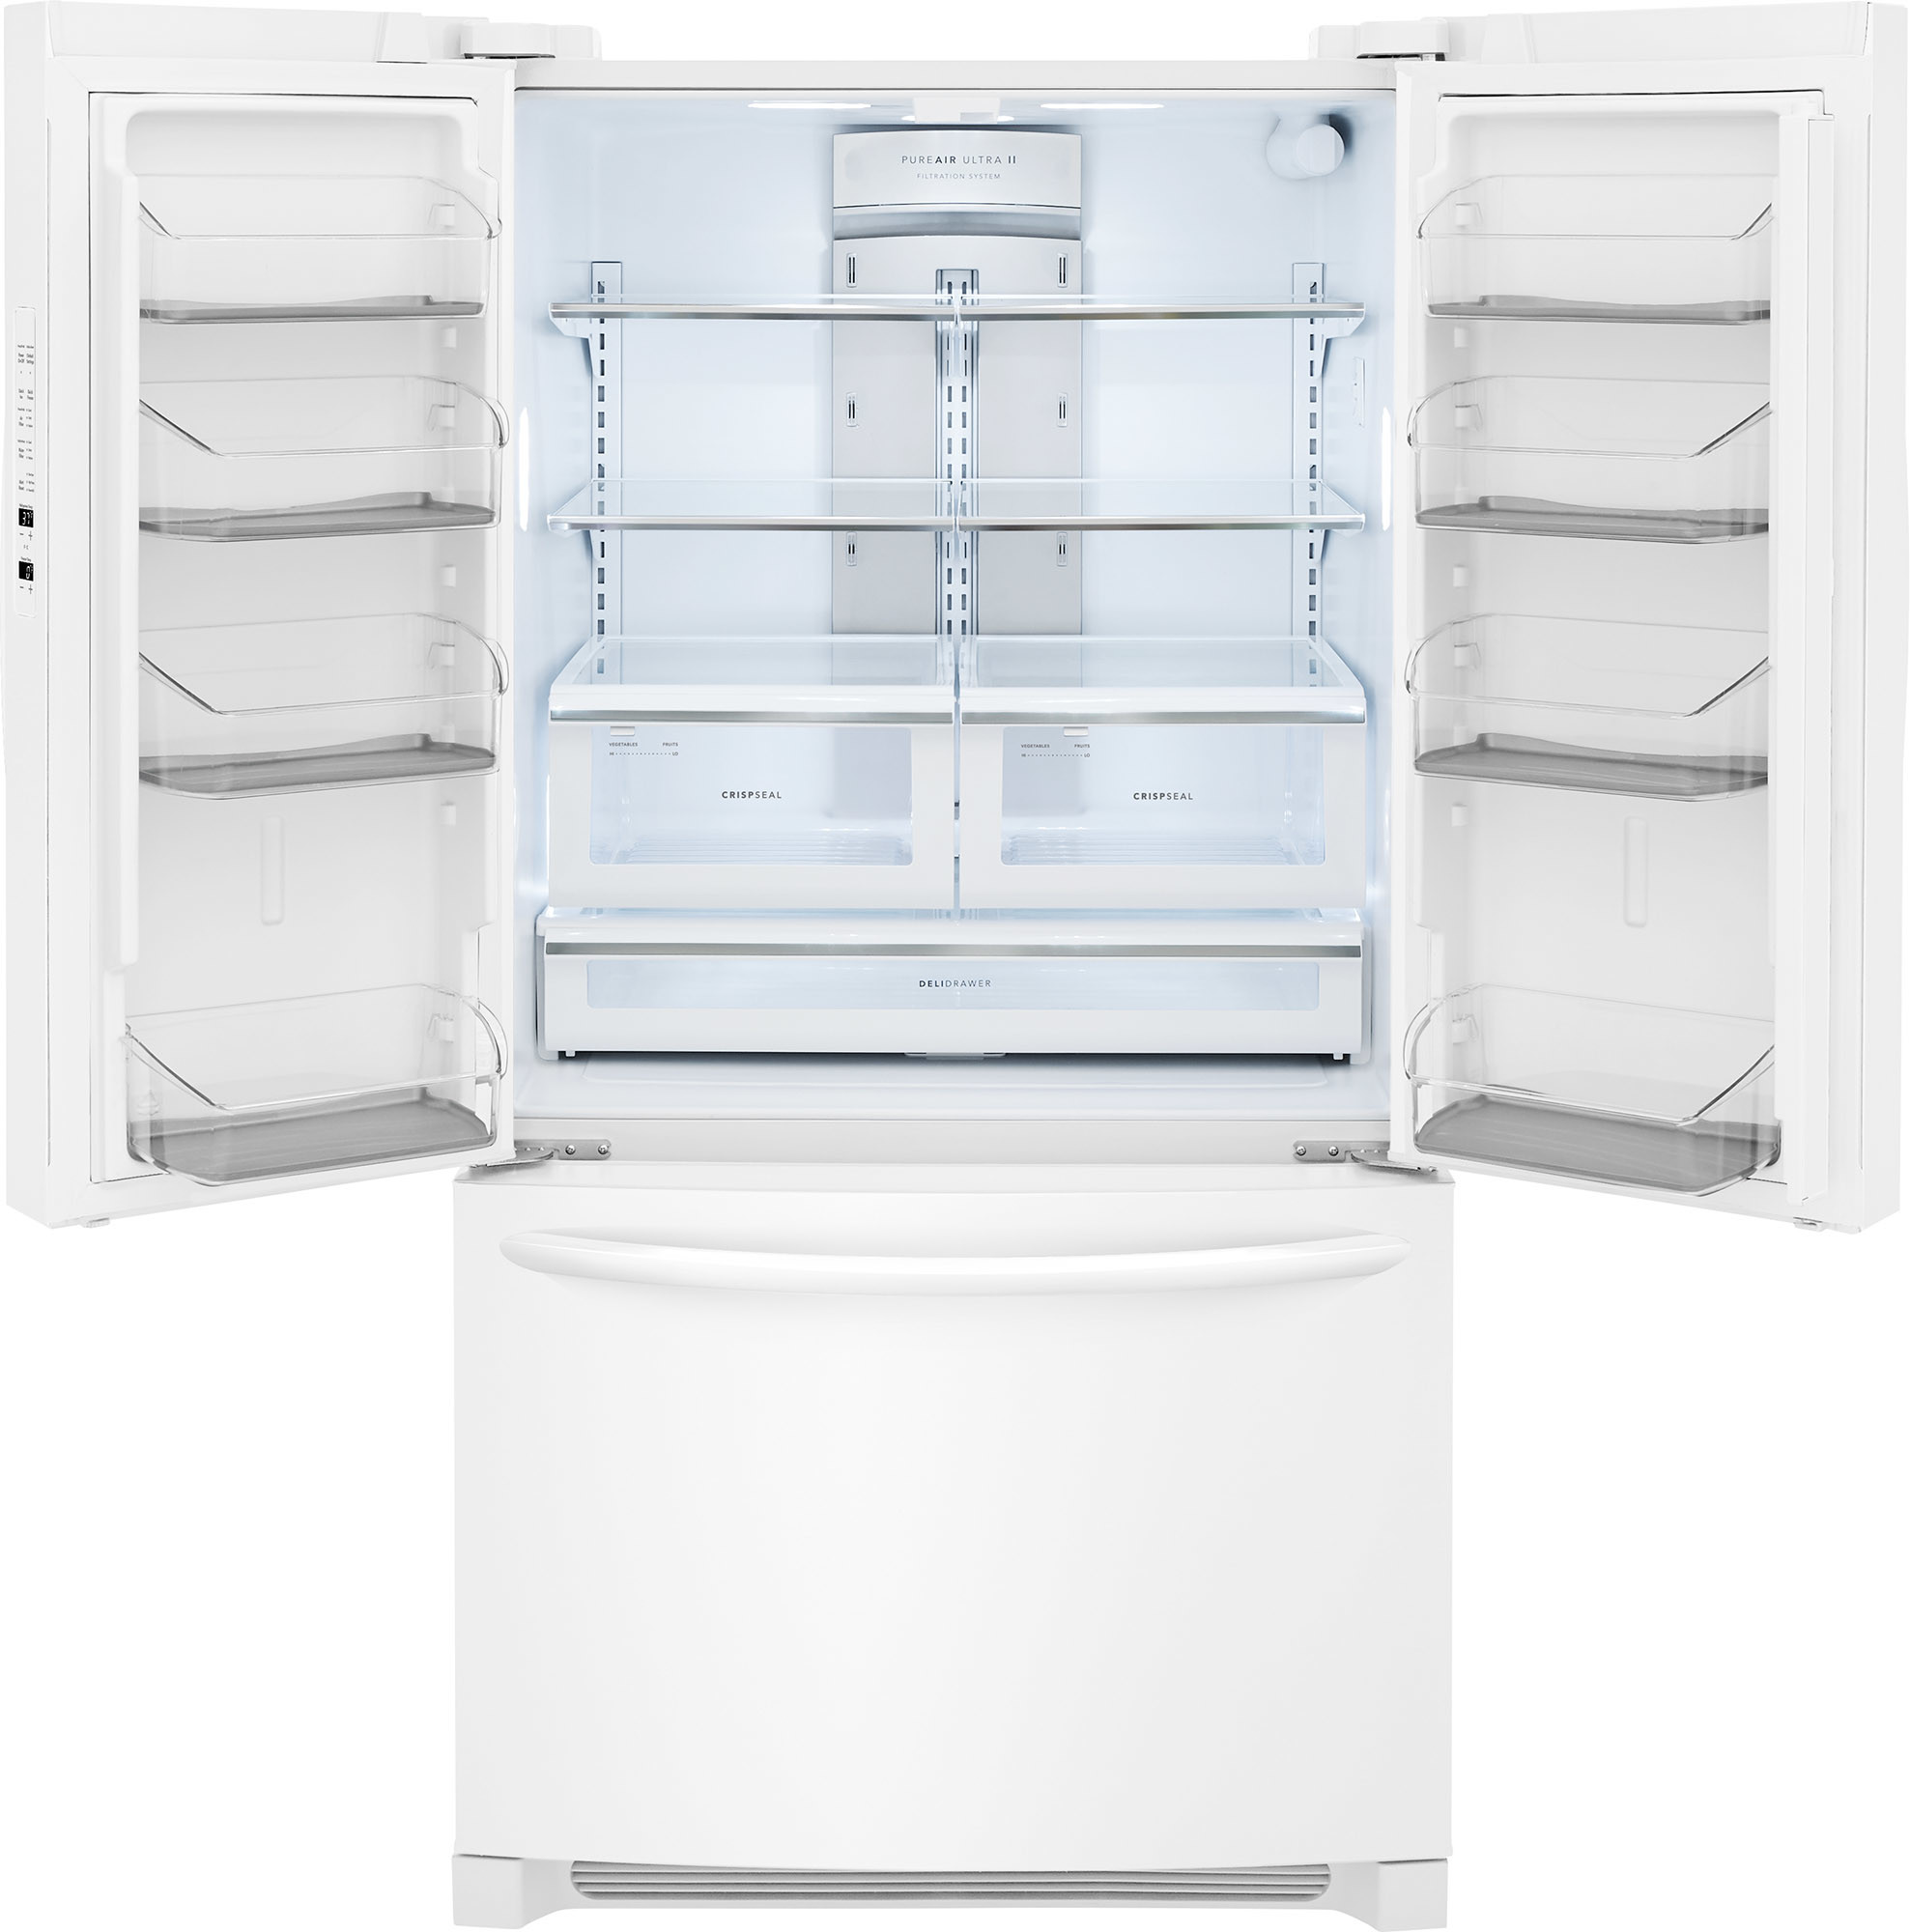 Frigidaire Gallery FGHN2868TF 28 Cu. Ft. Stainless French Door Refrigerator - image 4 of 7